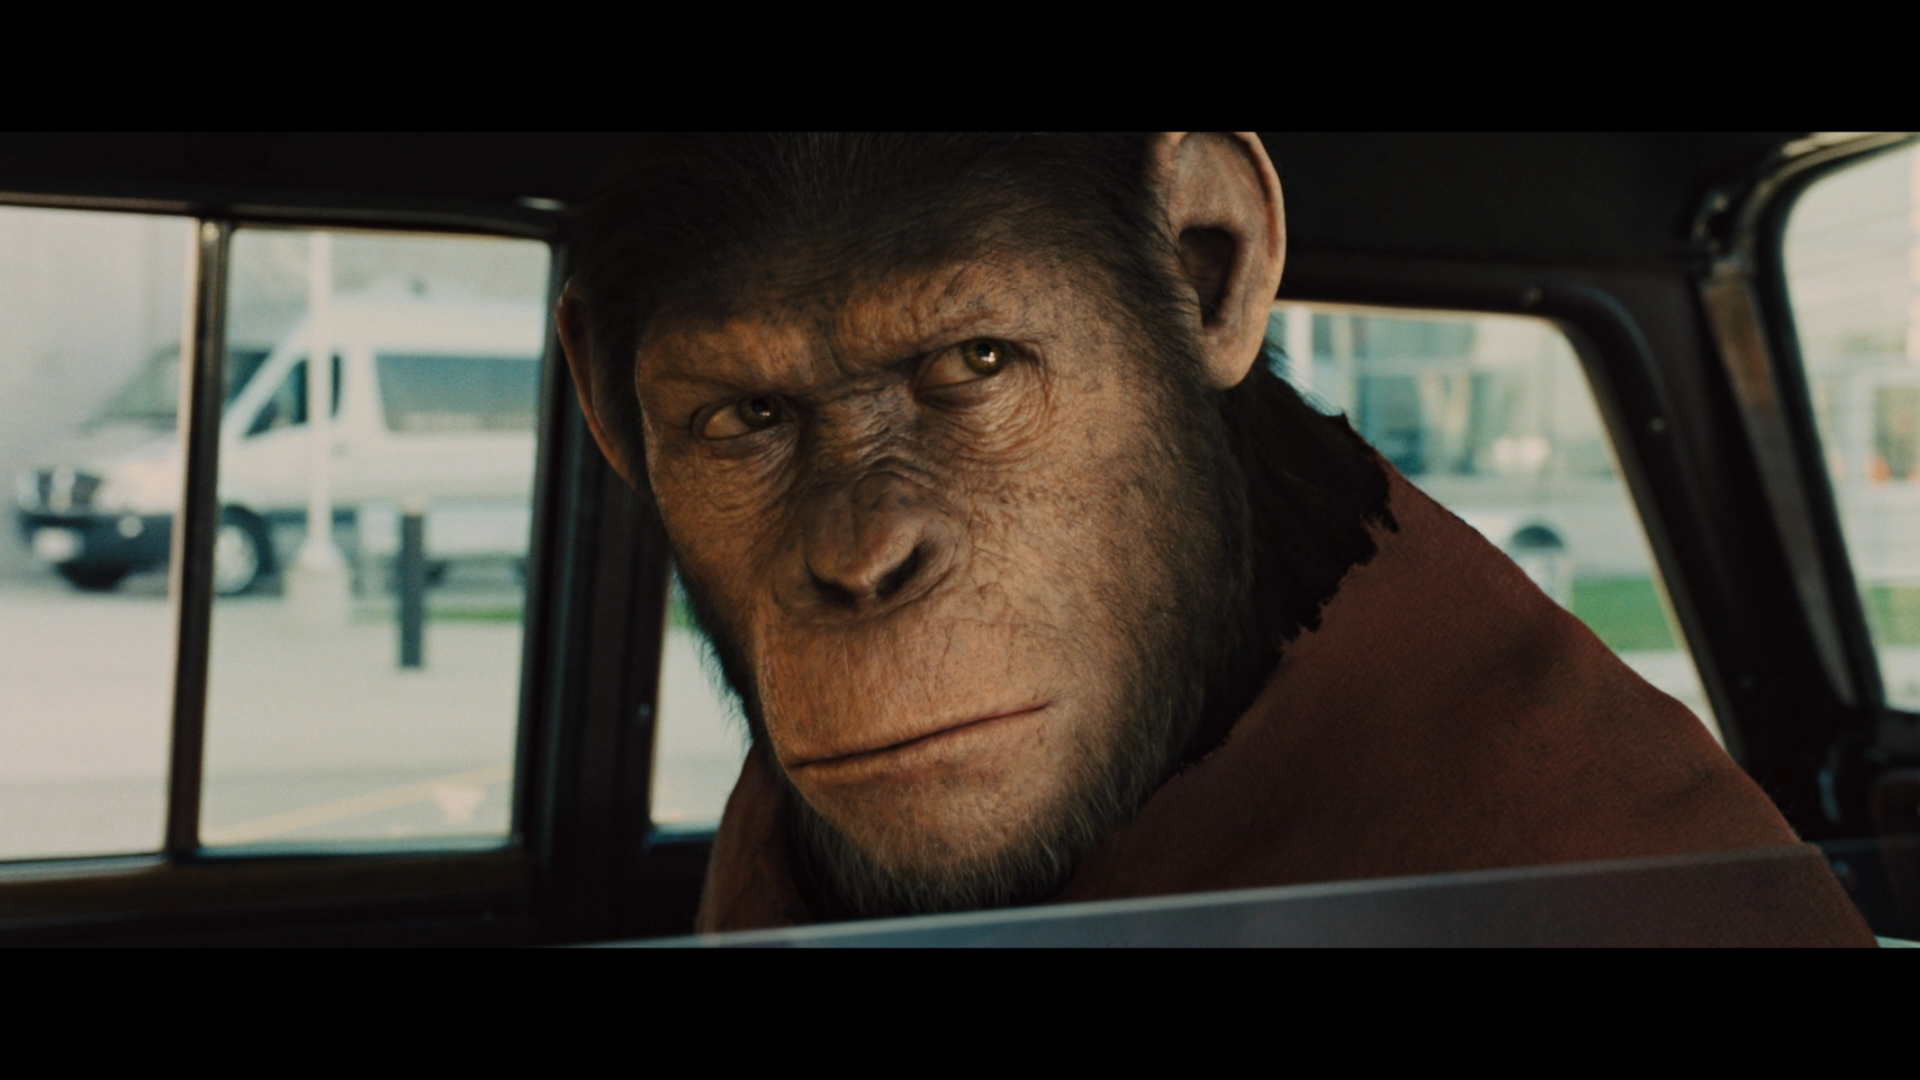 large_rise_of_the_planet_of_the_apes_blu-ray_9.jpg